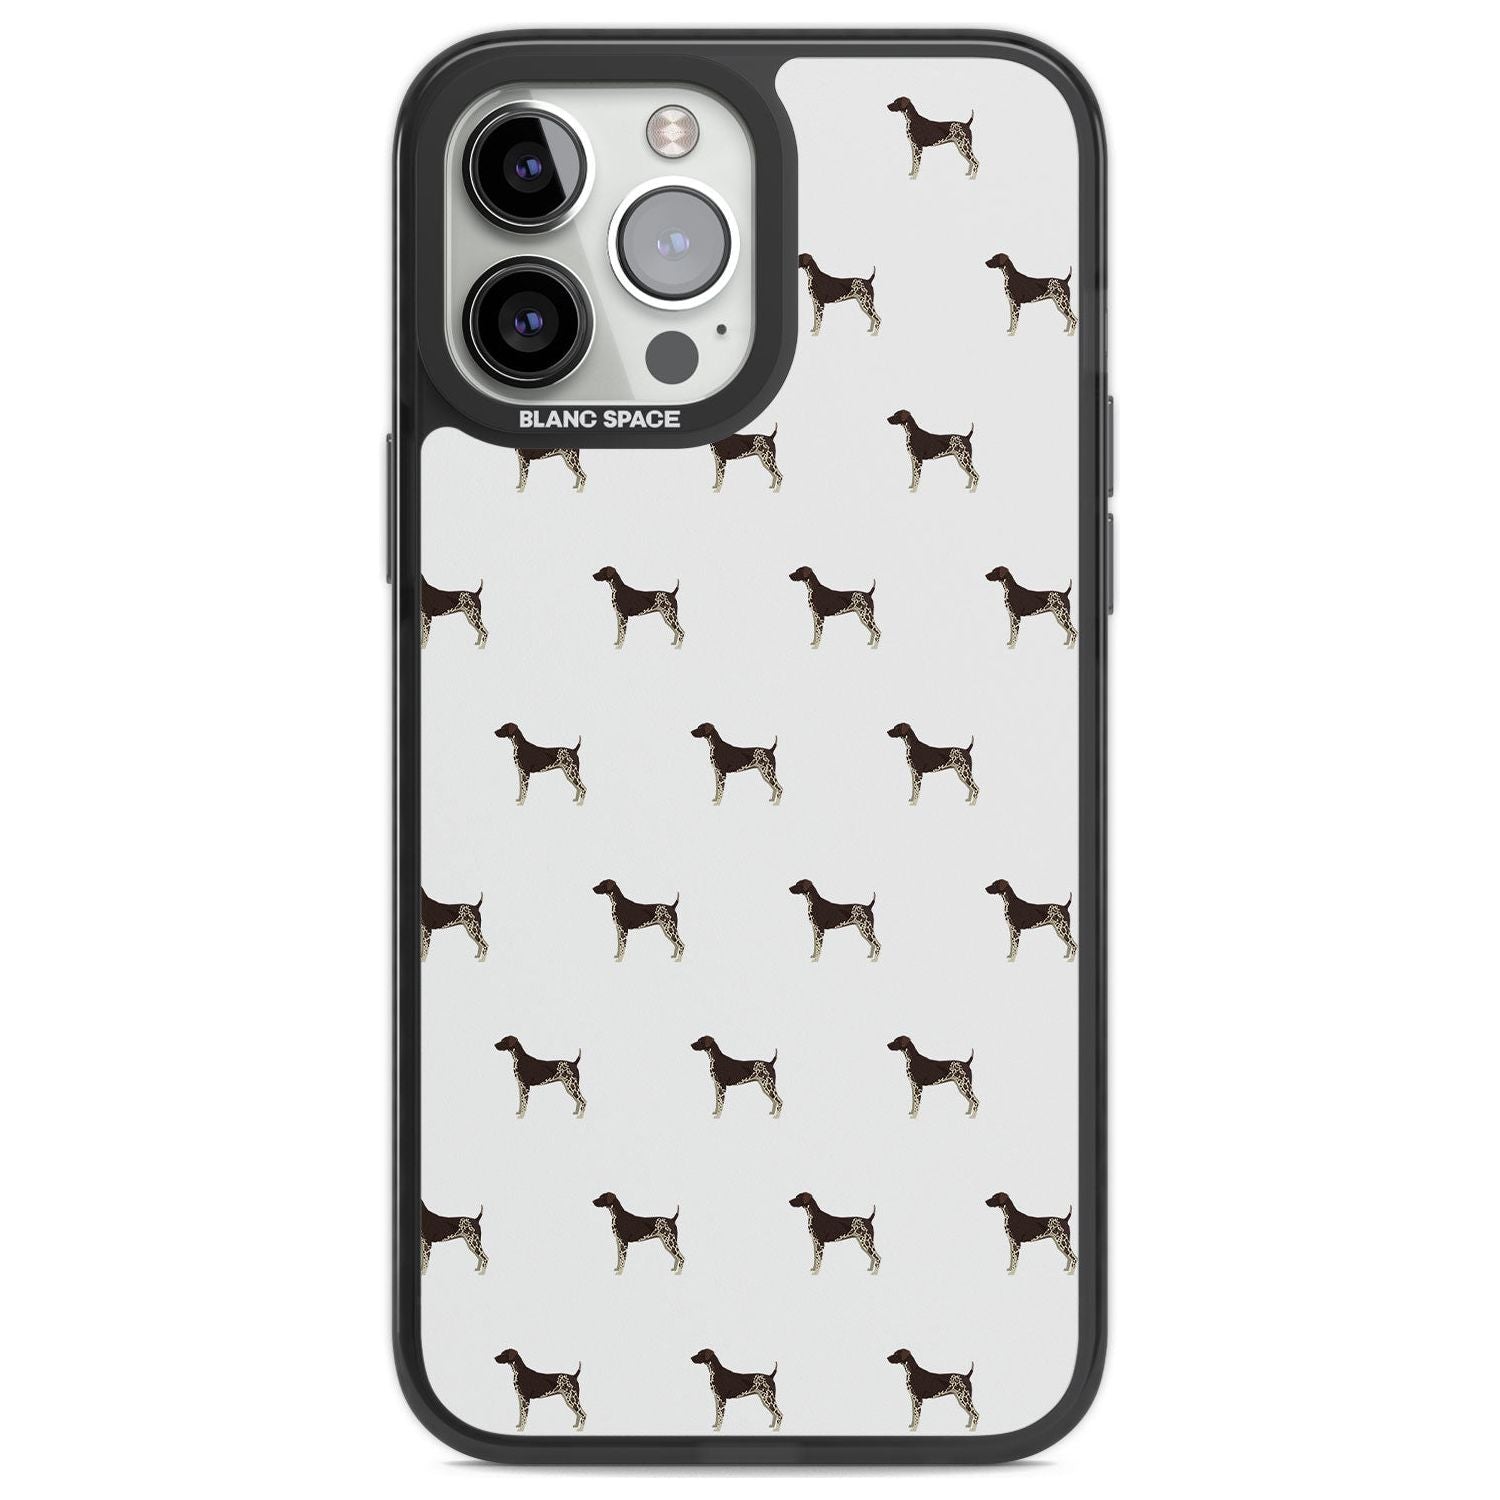 German Shorthaired Pointer Dog Pattern Phone Case iPhone 13 Pro Max / Black Impact Case,iPhone 14 Pro Max / Black Impact Case Blanc Space